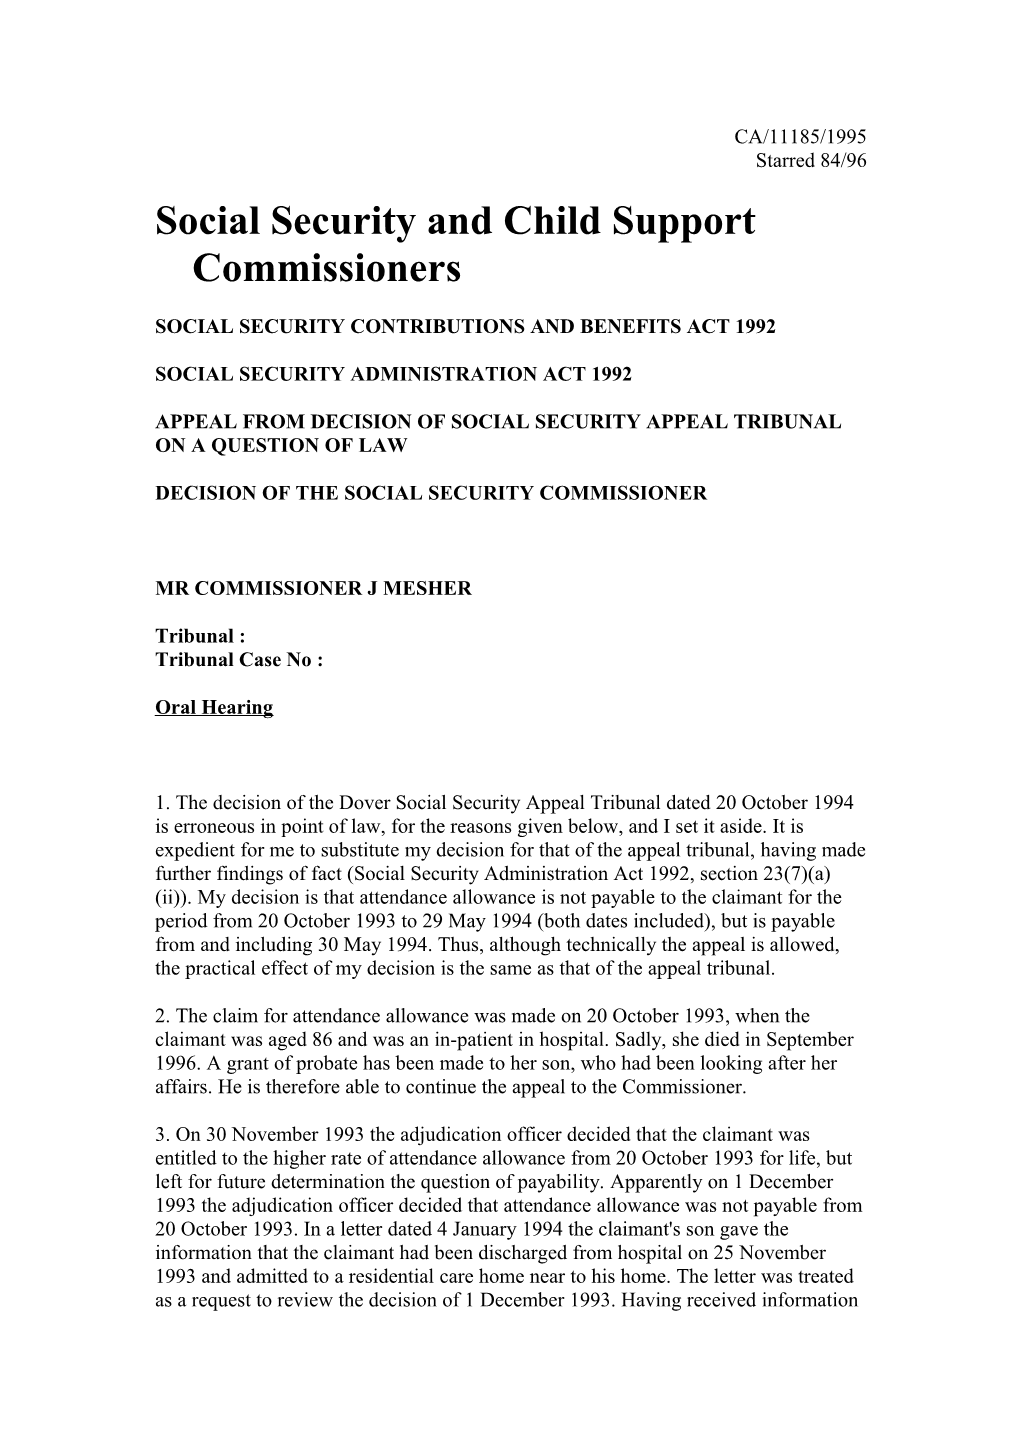 Social Security and Child Support Commissioners